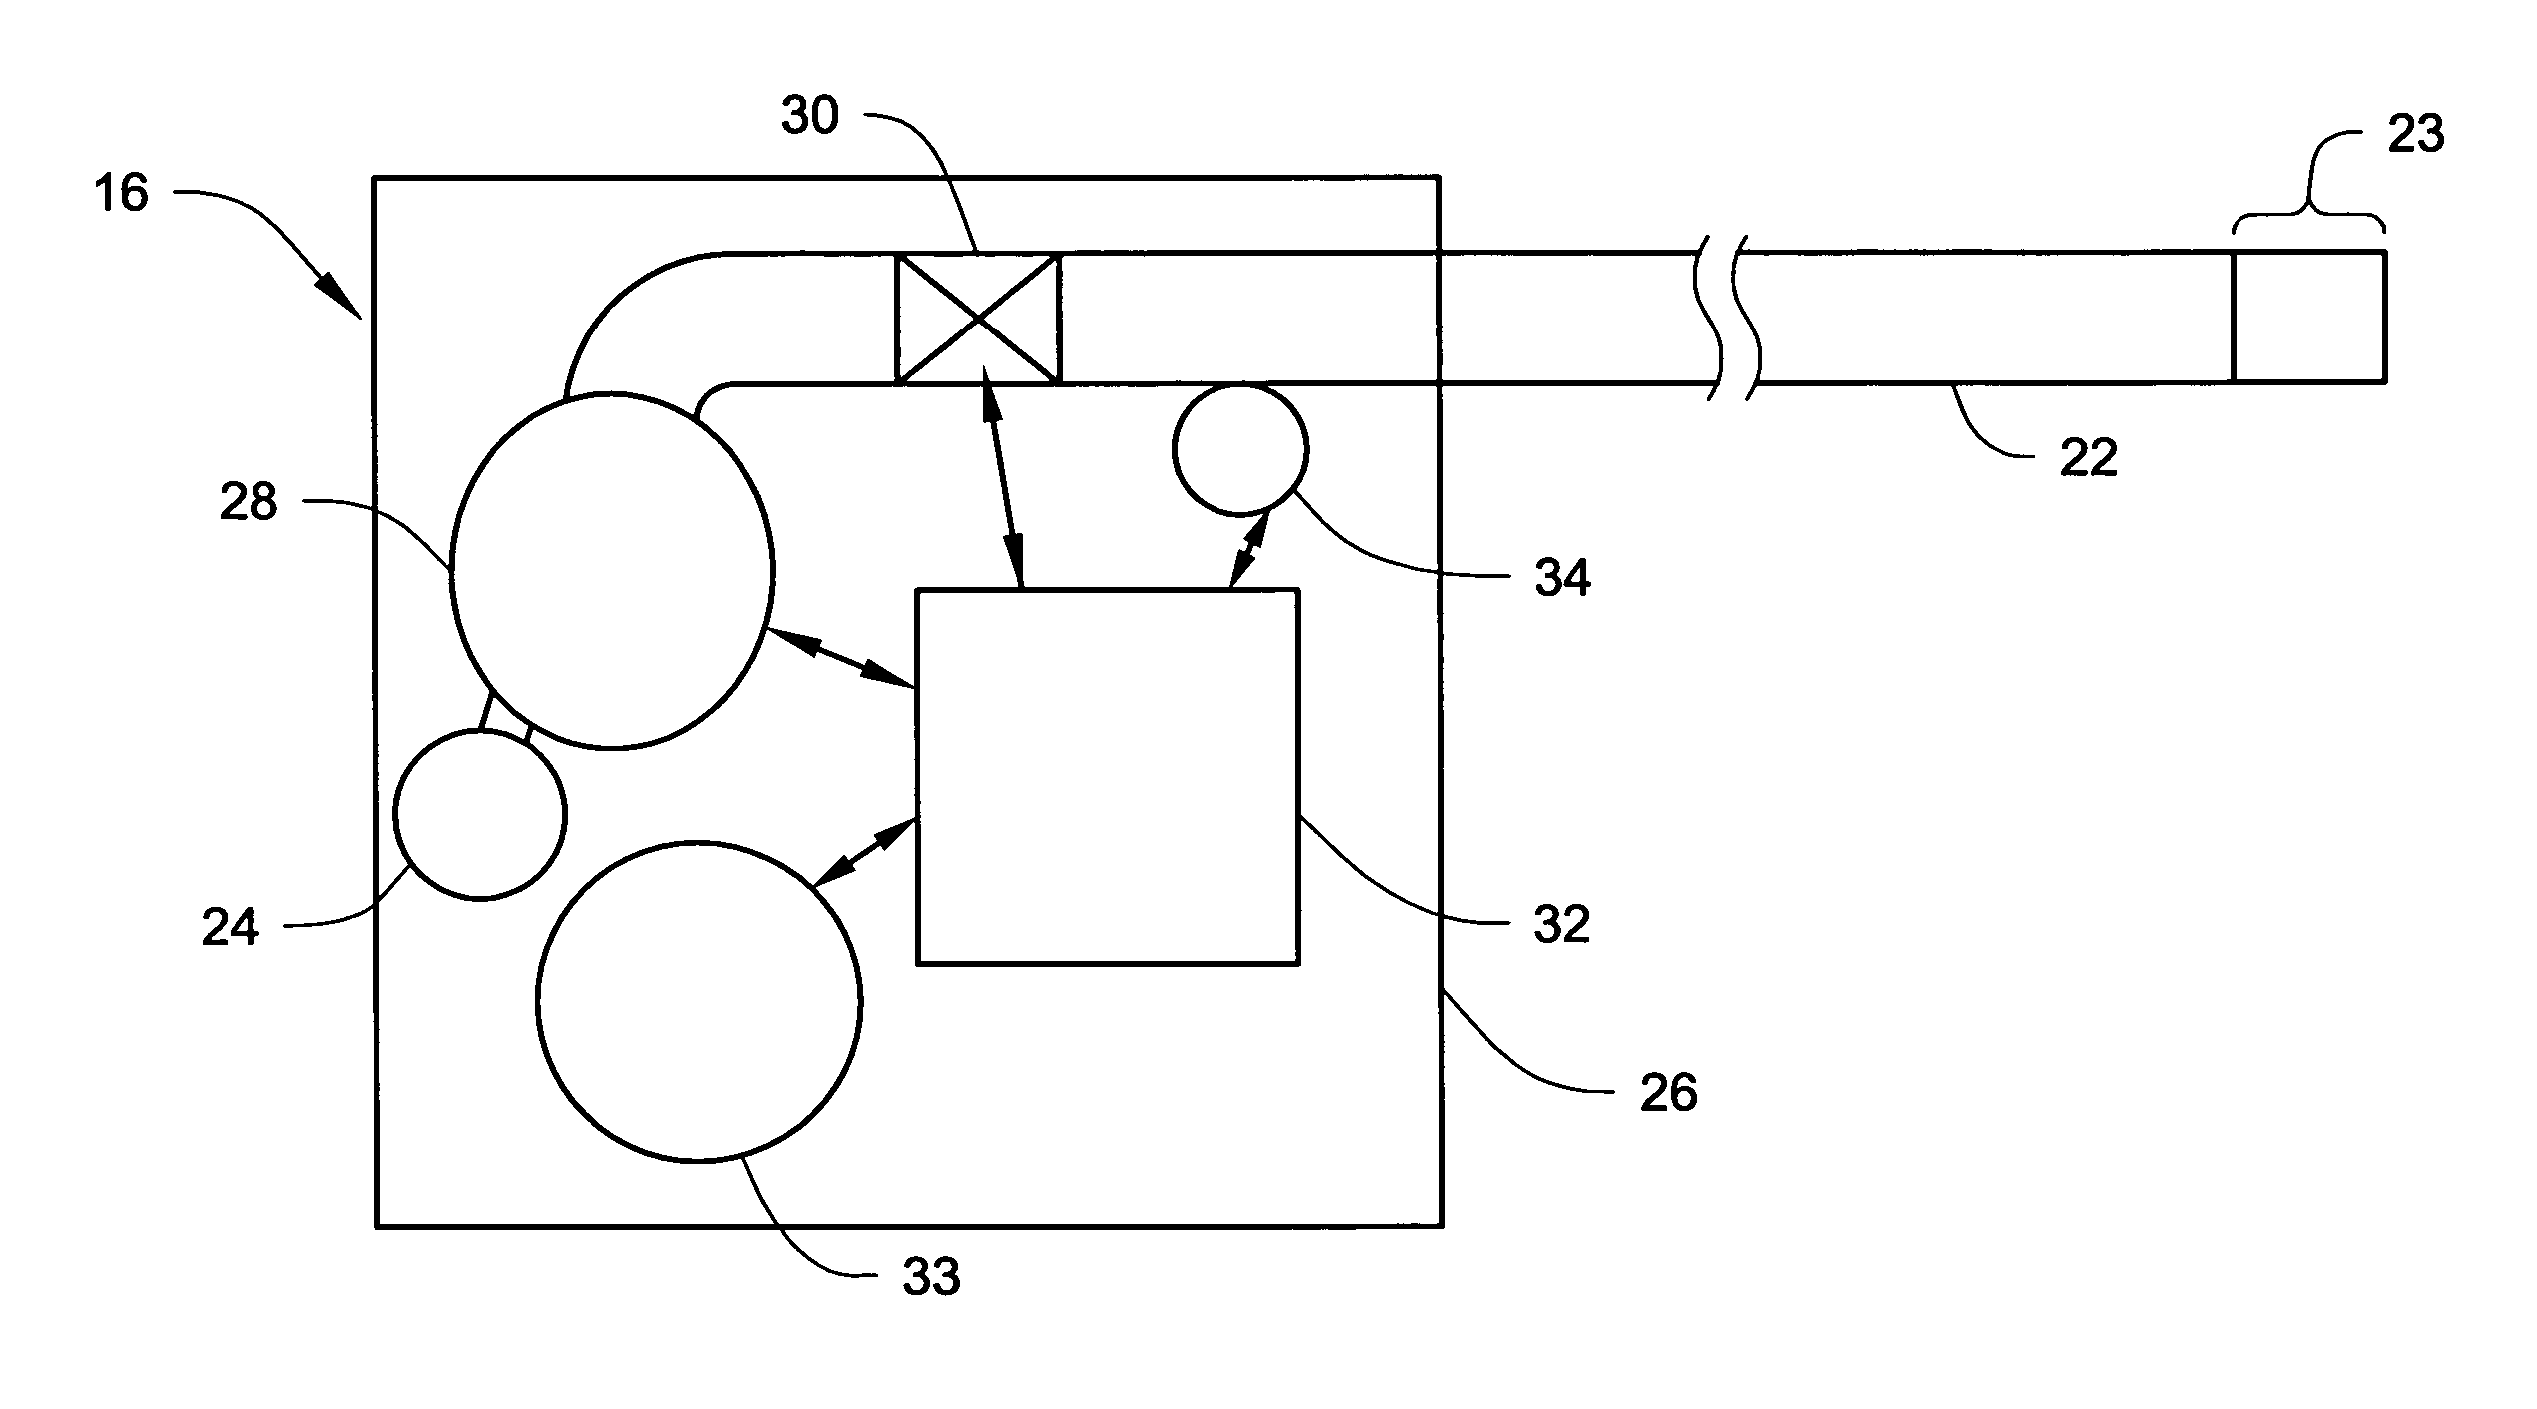 Systems and methods of identifying catheter malfunctions using pressure sensing